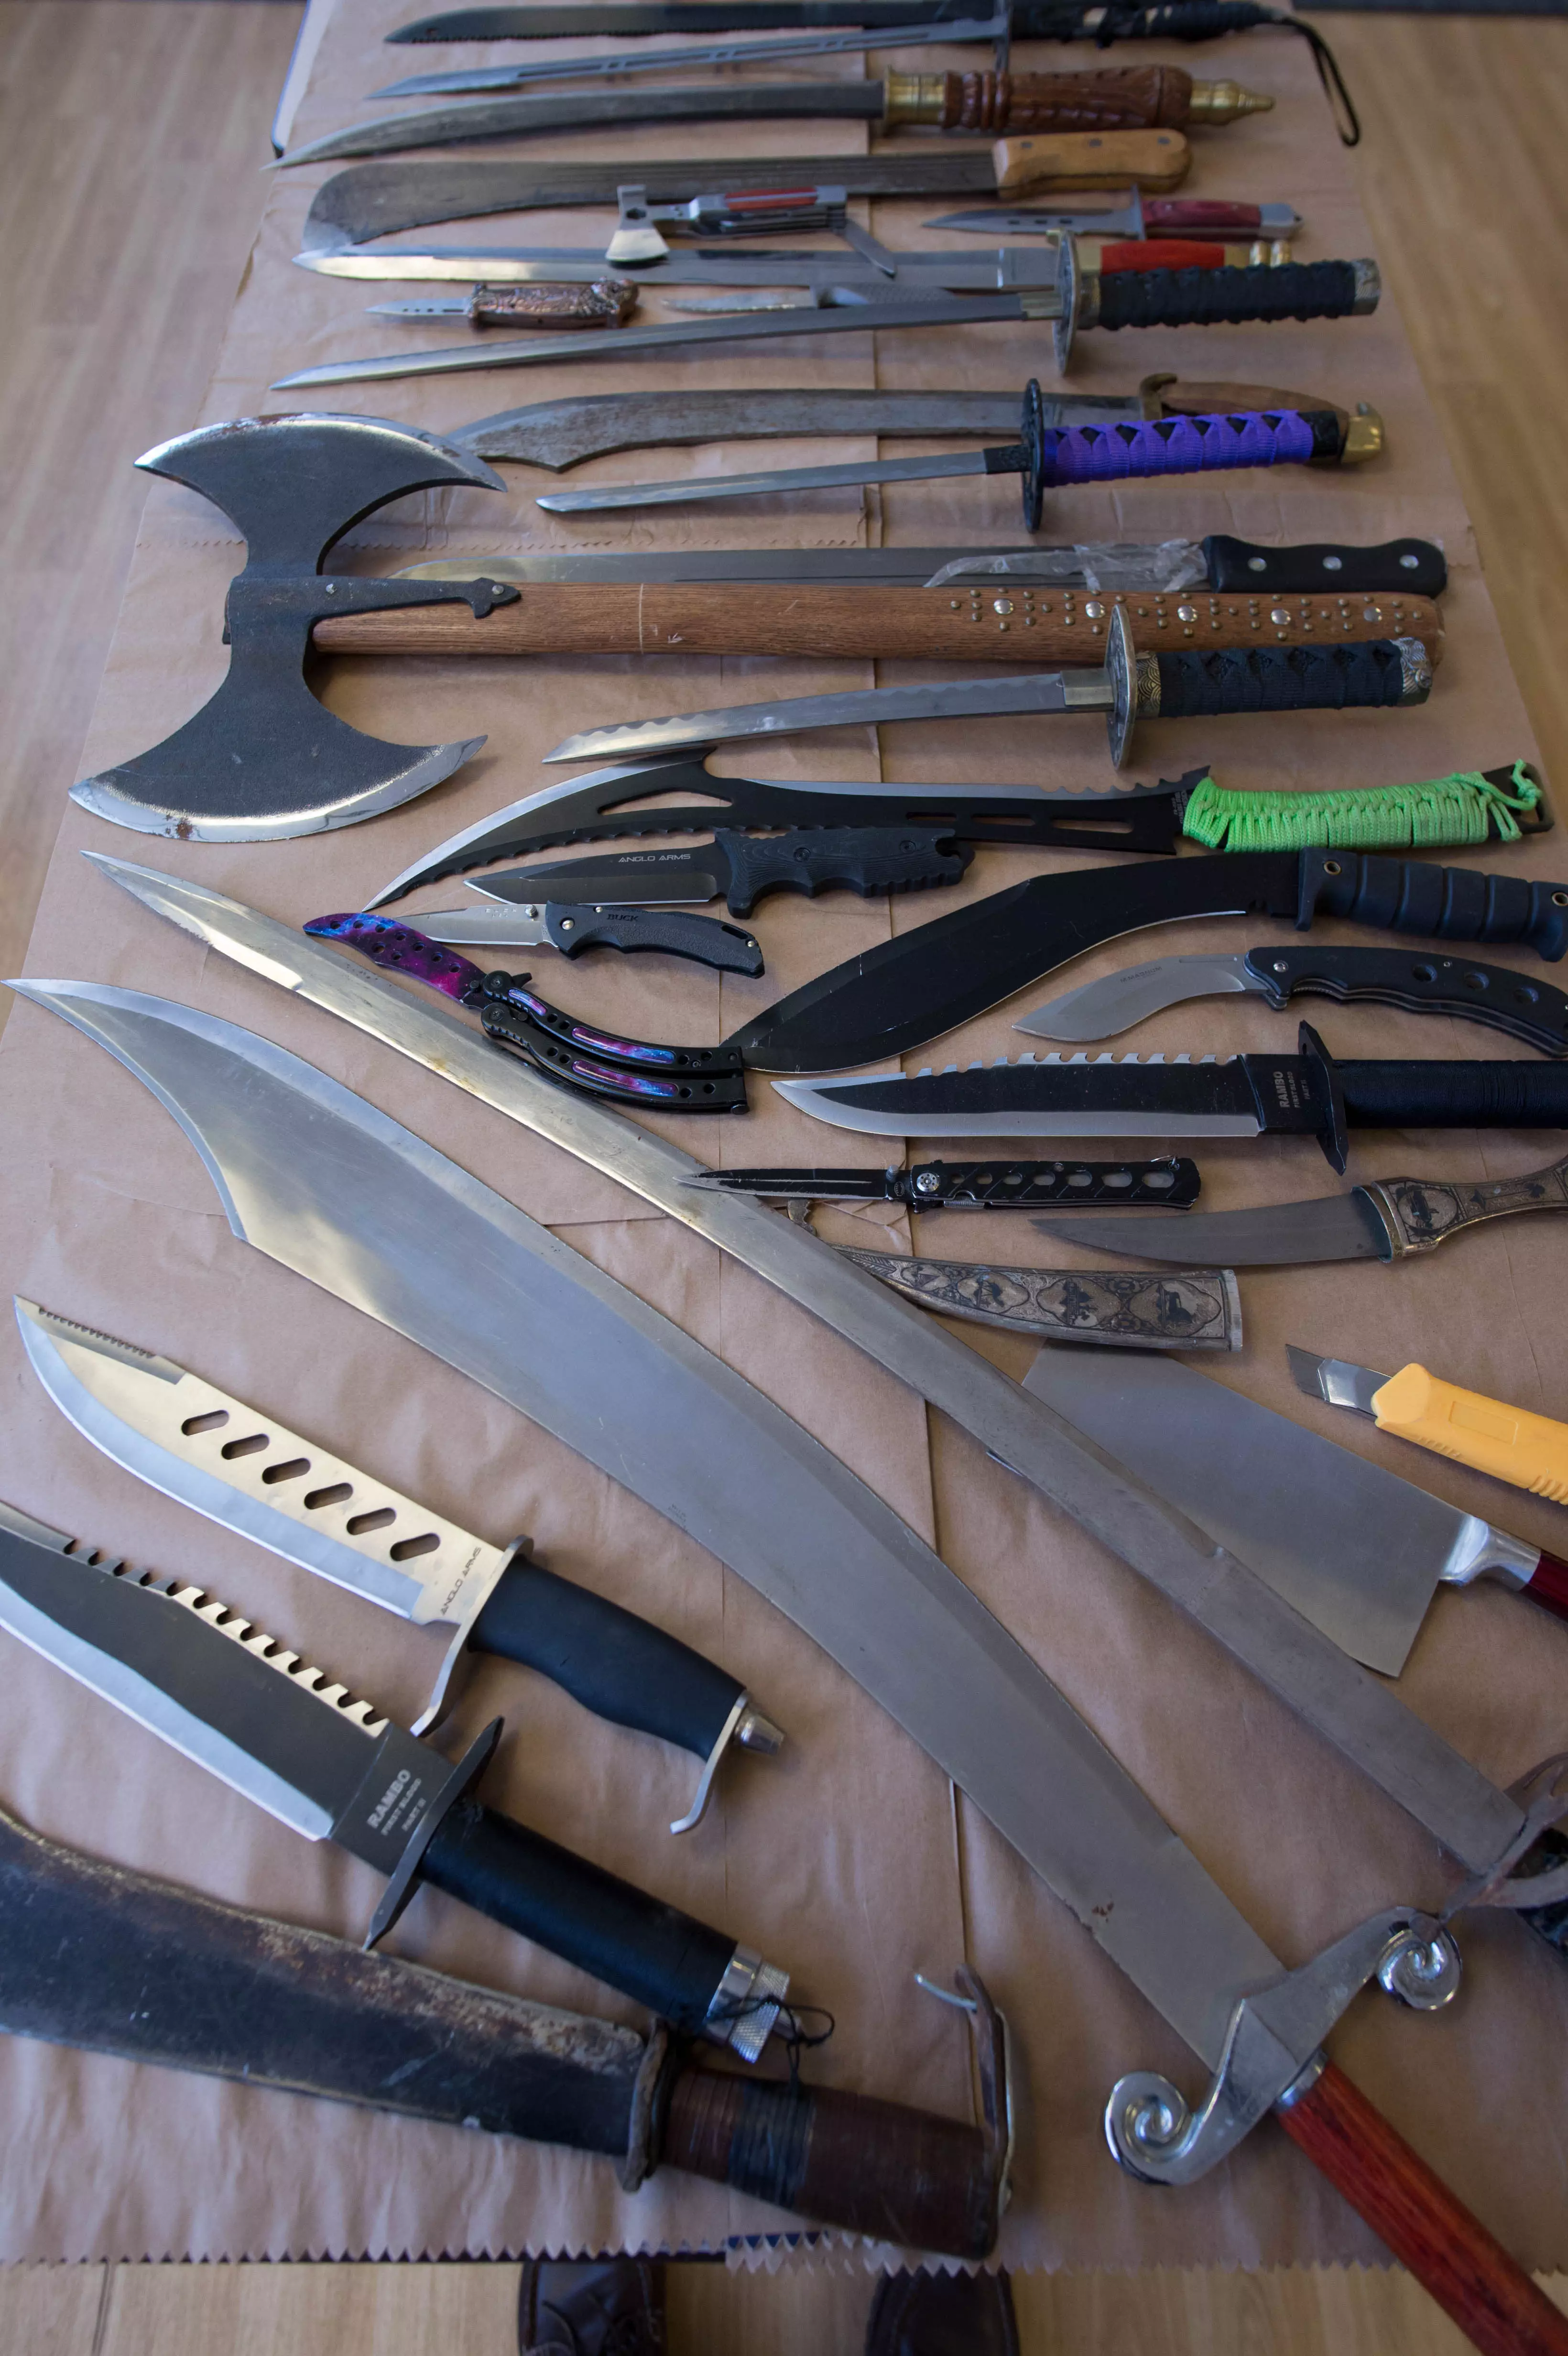 These are literally some of the weapons that have been recovered by London officers.